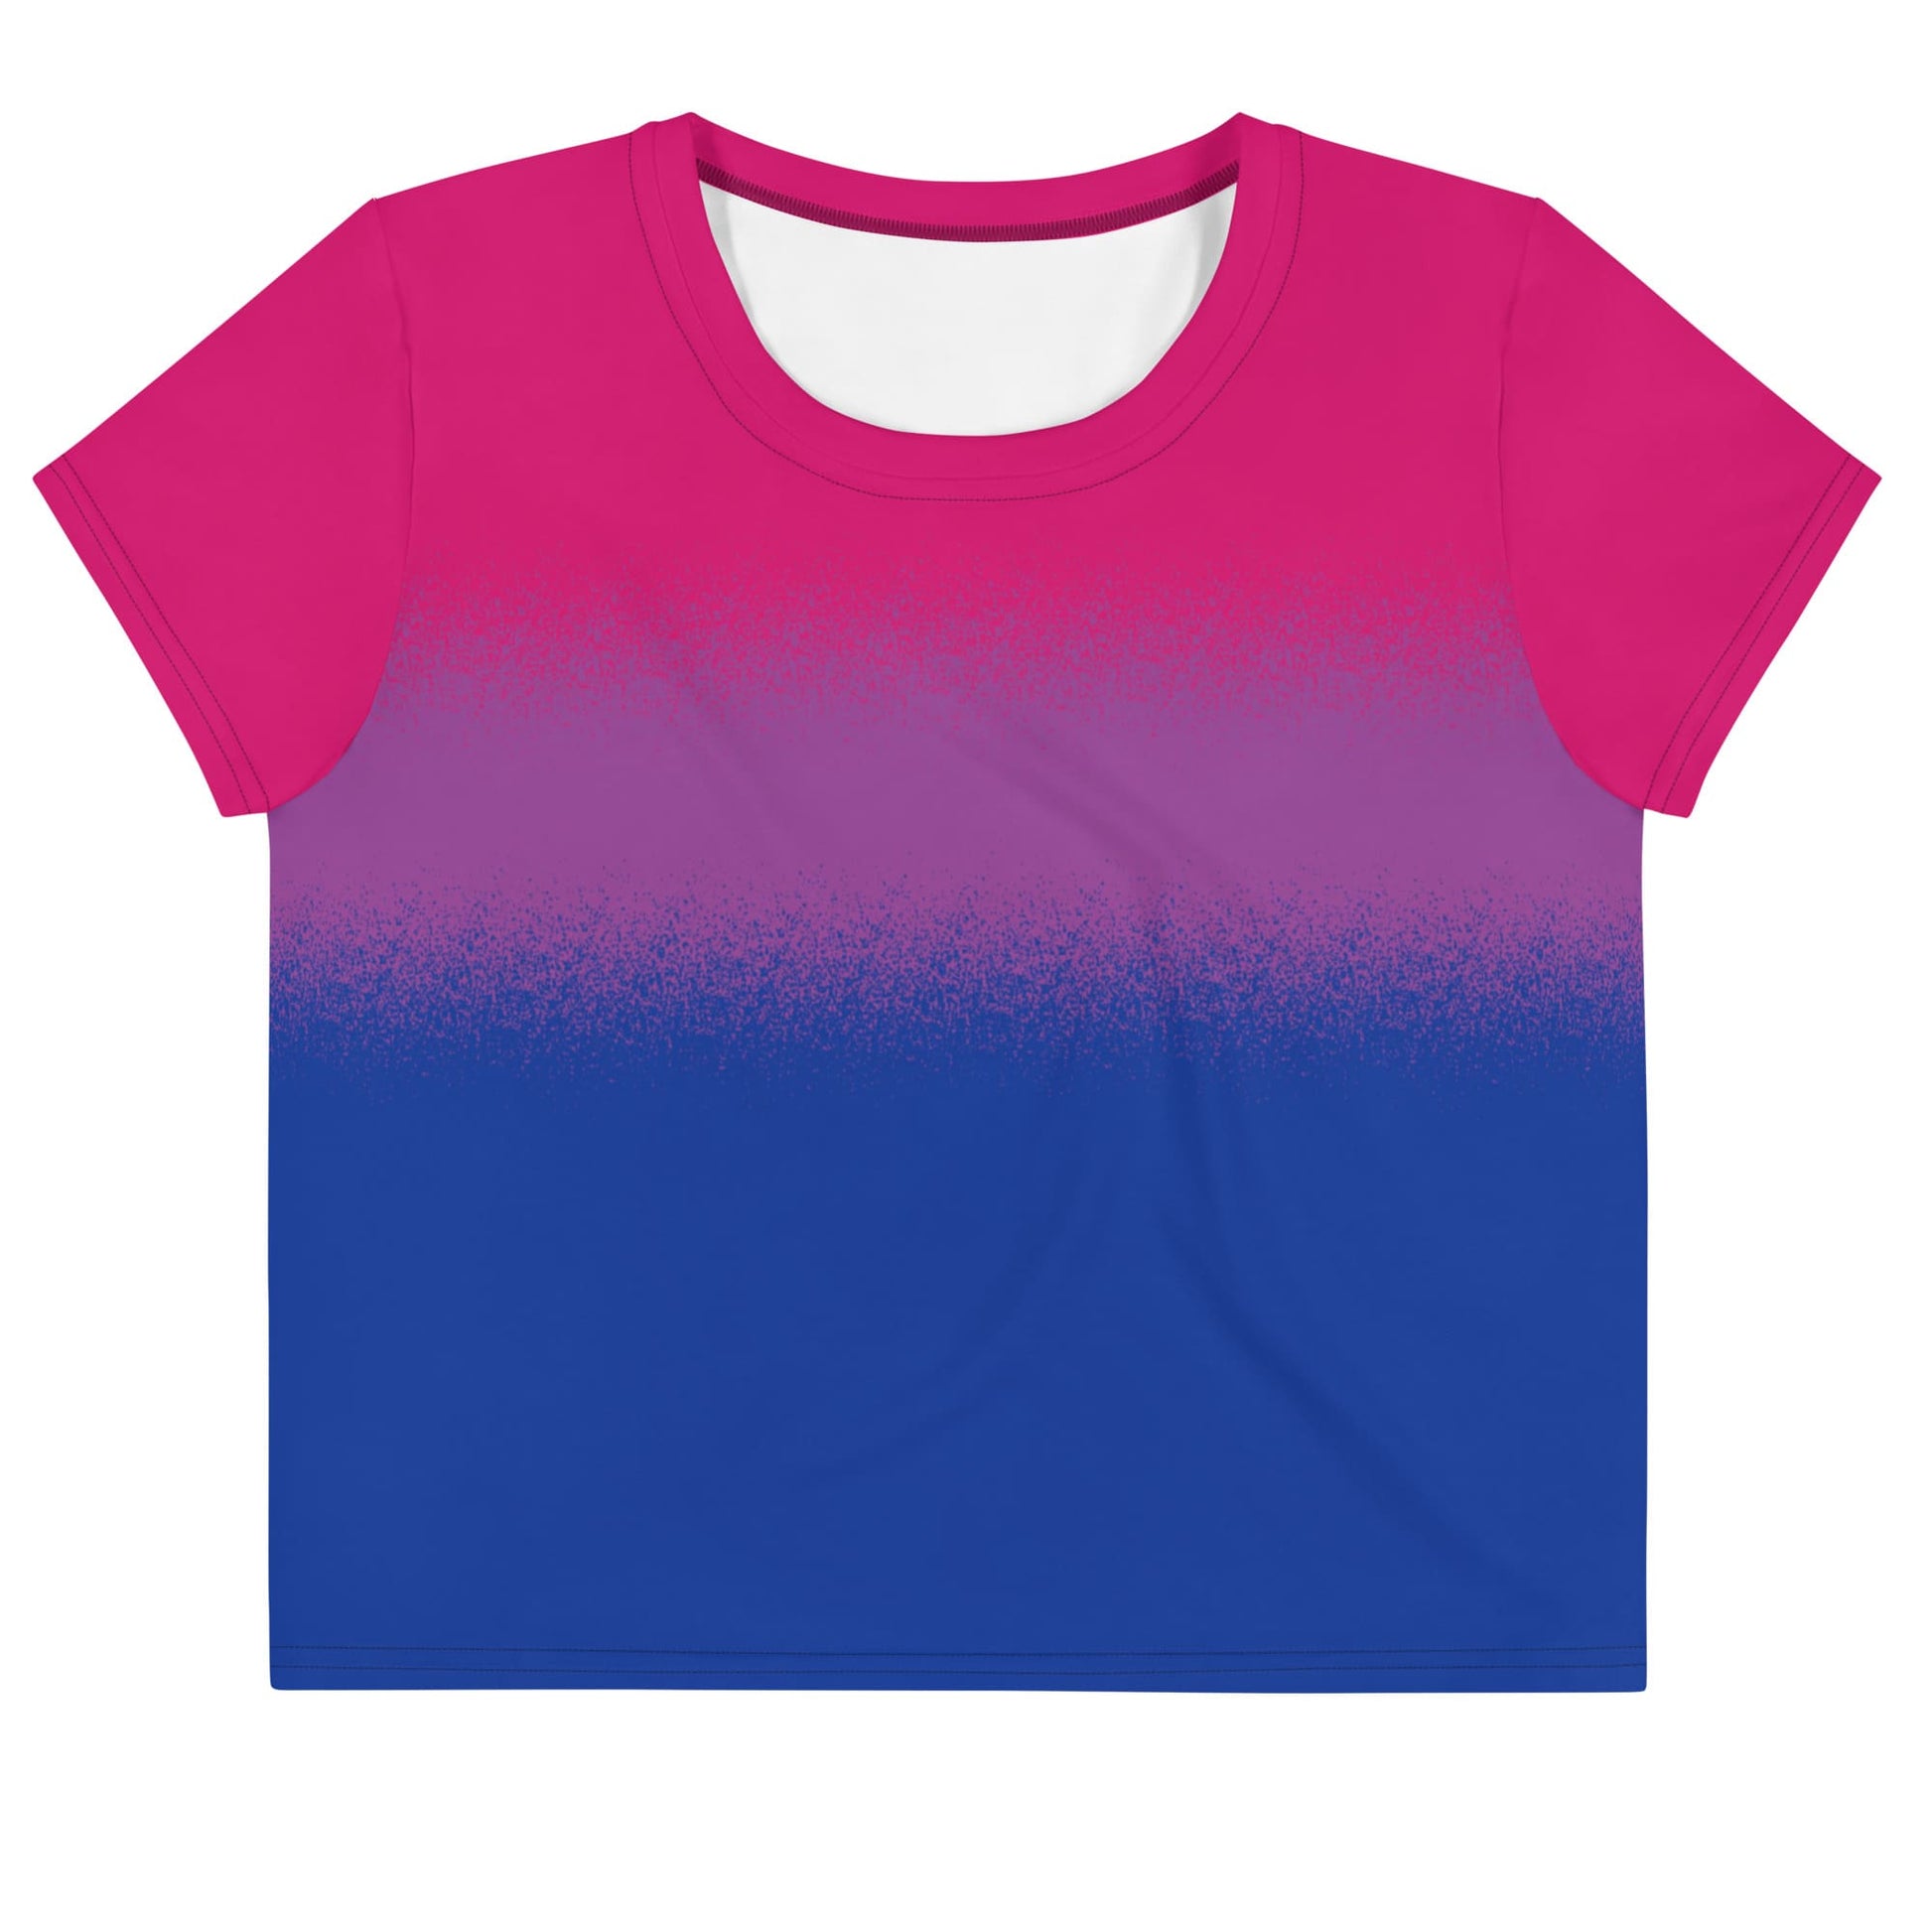 bisexual crop top, bi pride cropped shirt with wings on back, flatlay front